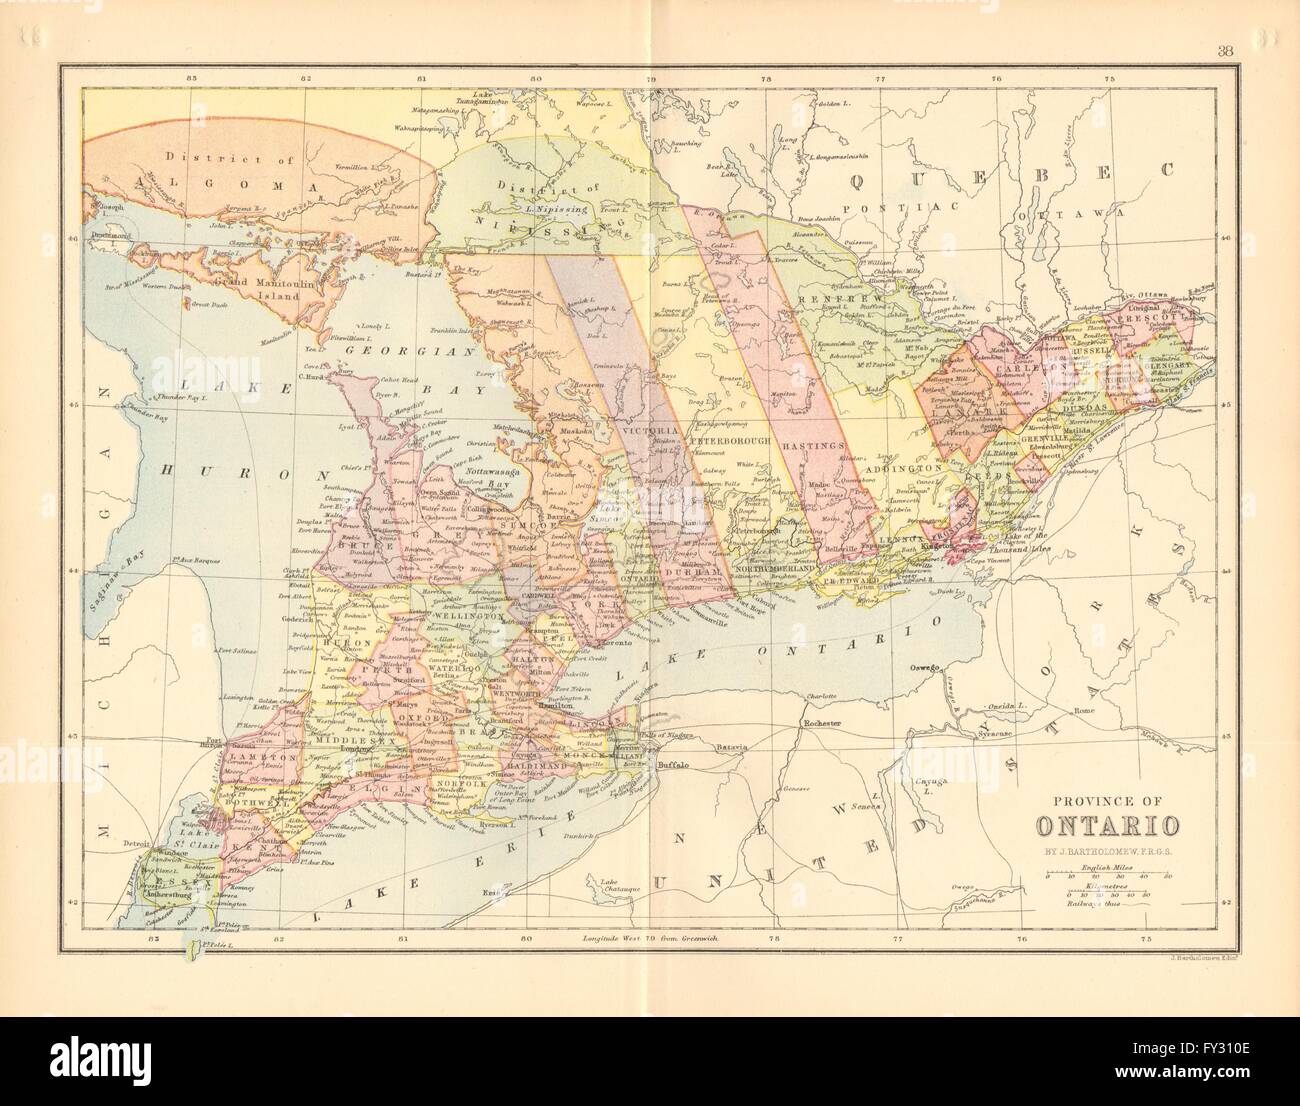 map of ontario counties and districts Canada Province Of Ontario Counties Railways Districts 1876 Stock Photo 102714206 Alamy map of ontario counties and districts